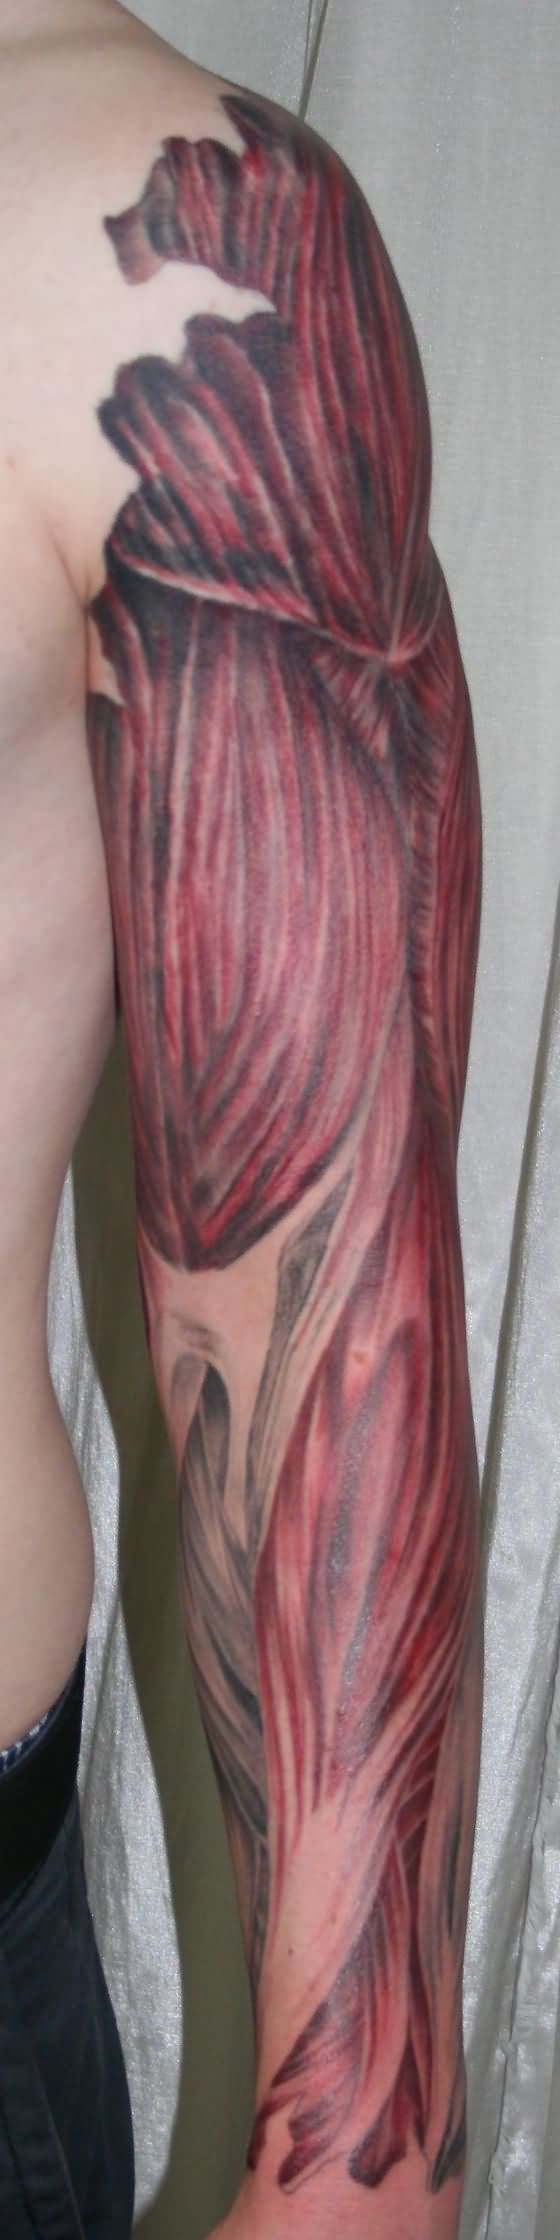 Ripped Skin Muscle Tattoo On Man Left Full Sleeve By 2Face